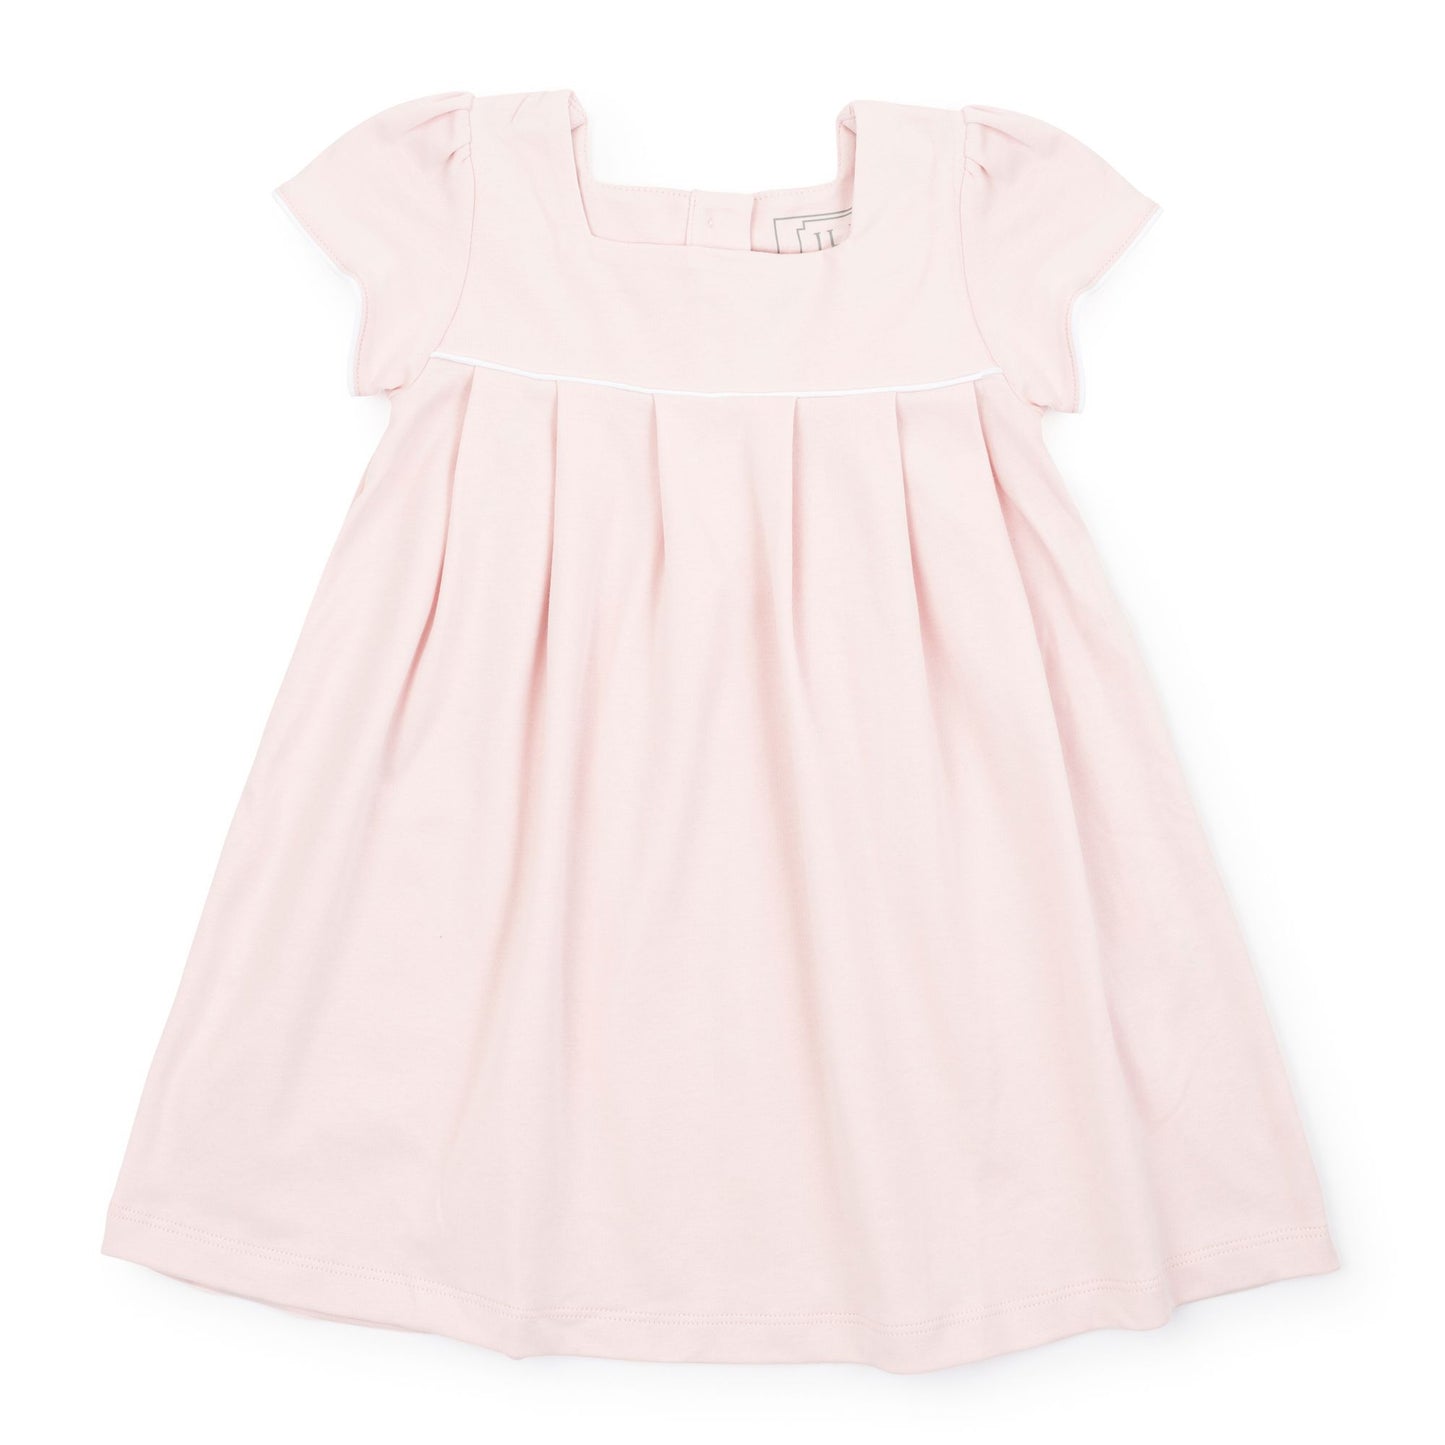 Lila and Hayes Lizzy Dress- Light Pink